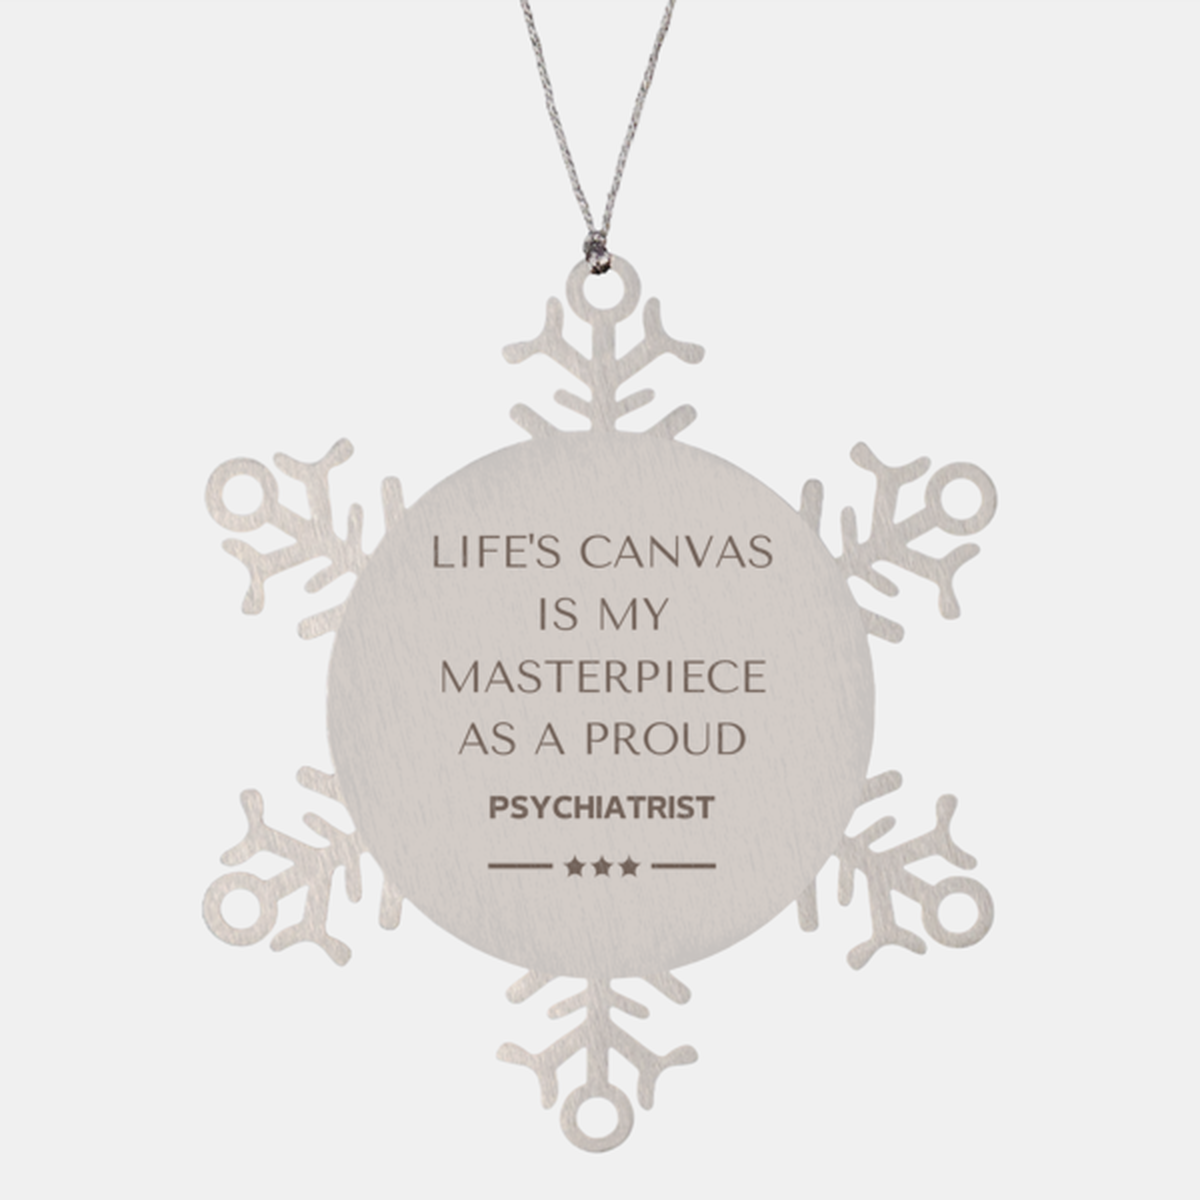 Proud Psychiatrist Gifts, Life's canvas is my masterpiece, Epic Birthday Christmas Unique Snowflake Ornament For Psychiatrist, Coworkers, Men, Women, Friends